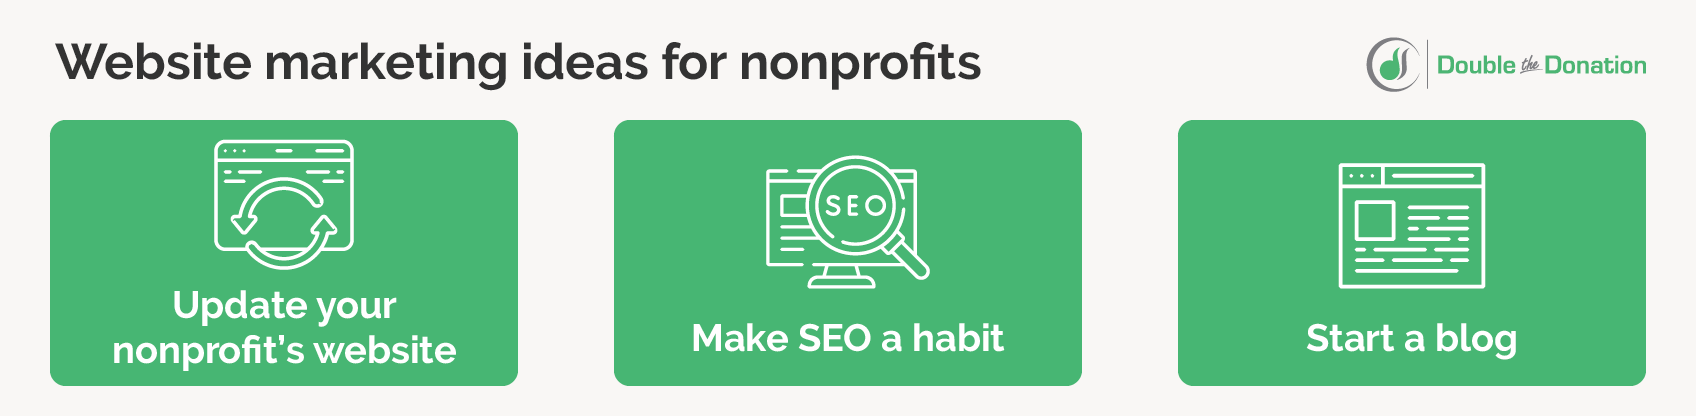 This image lists website marketing ideas for nonprofits.